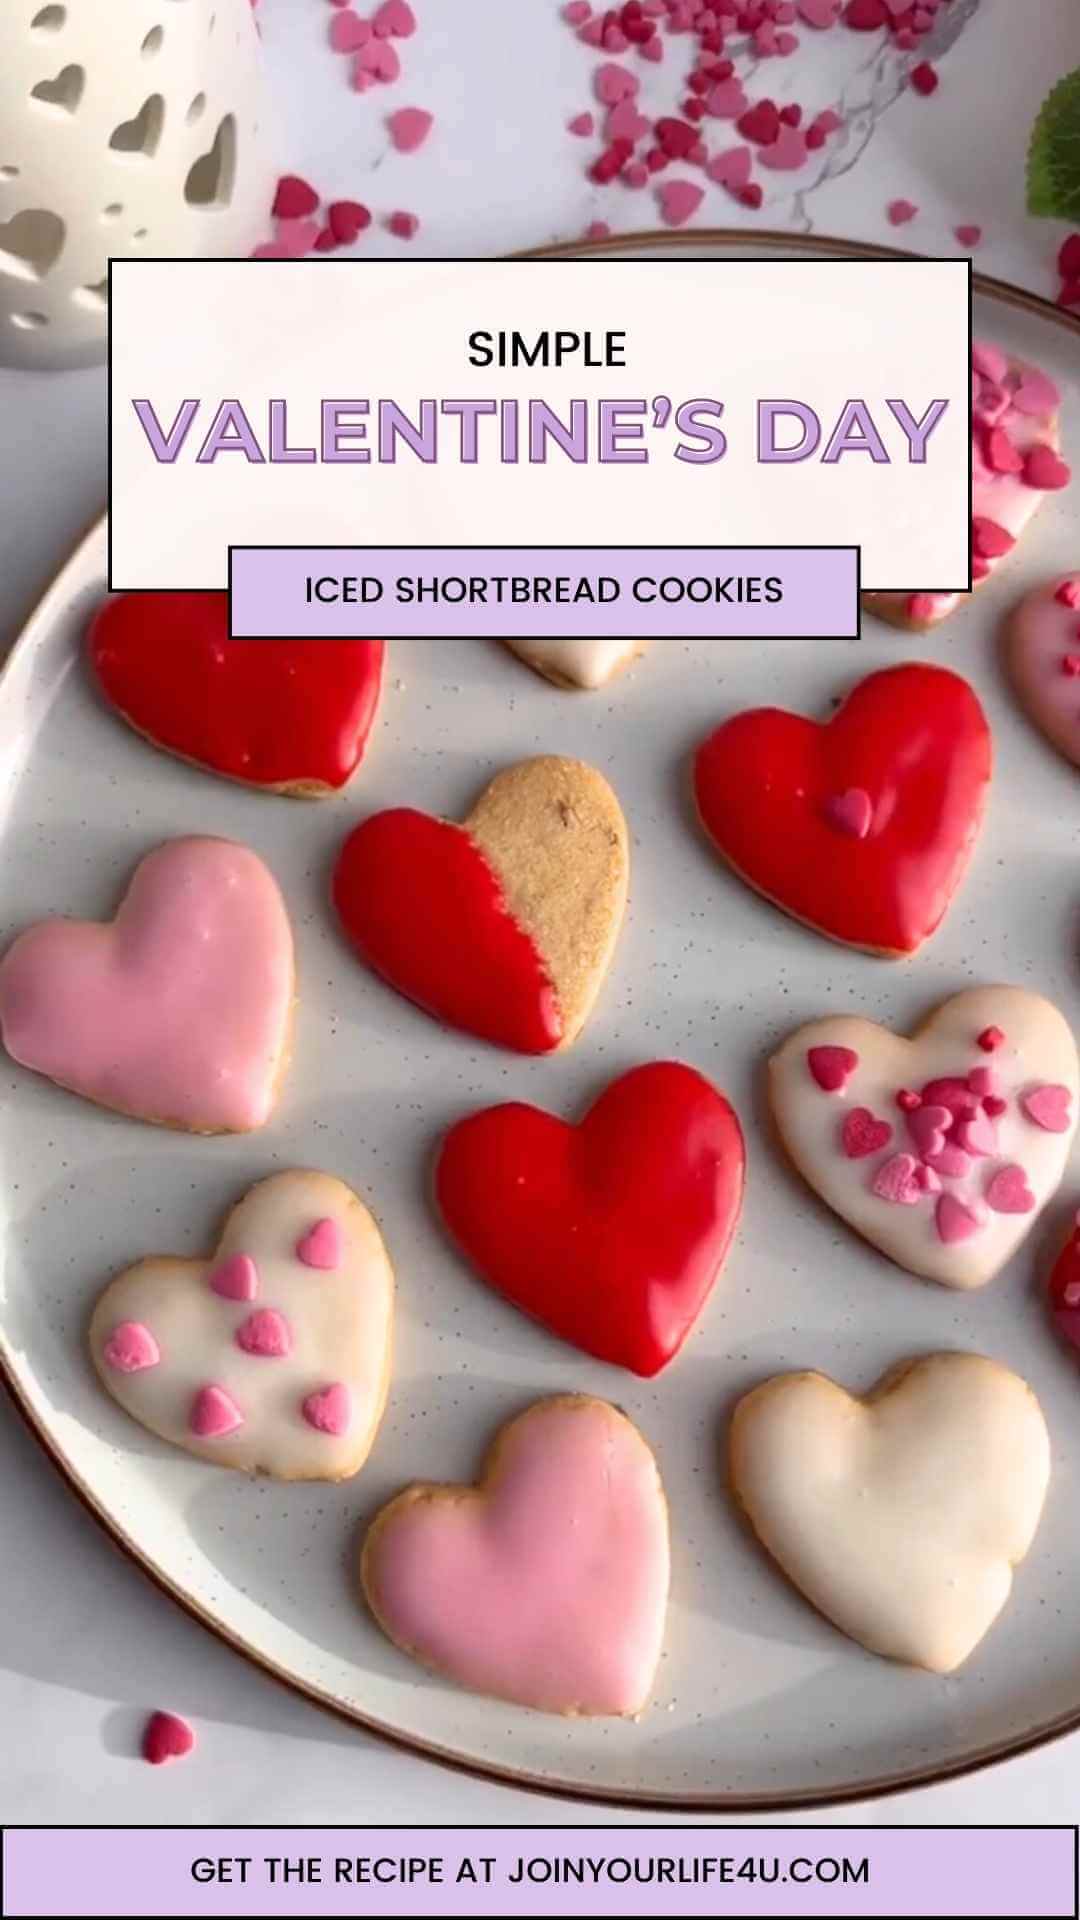 Valentine’s Day Iced Shortbread Cookies in heart shaped. 